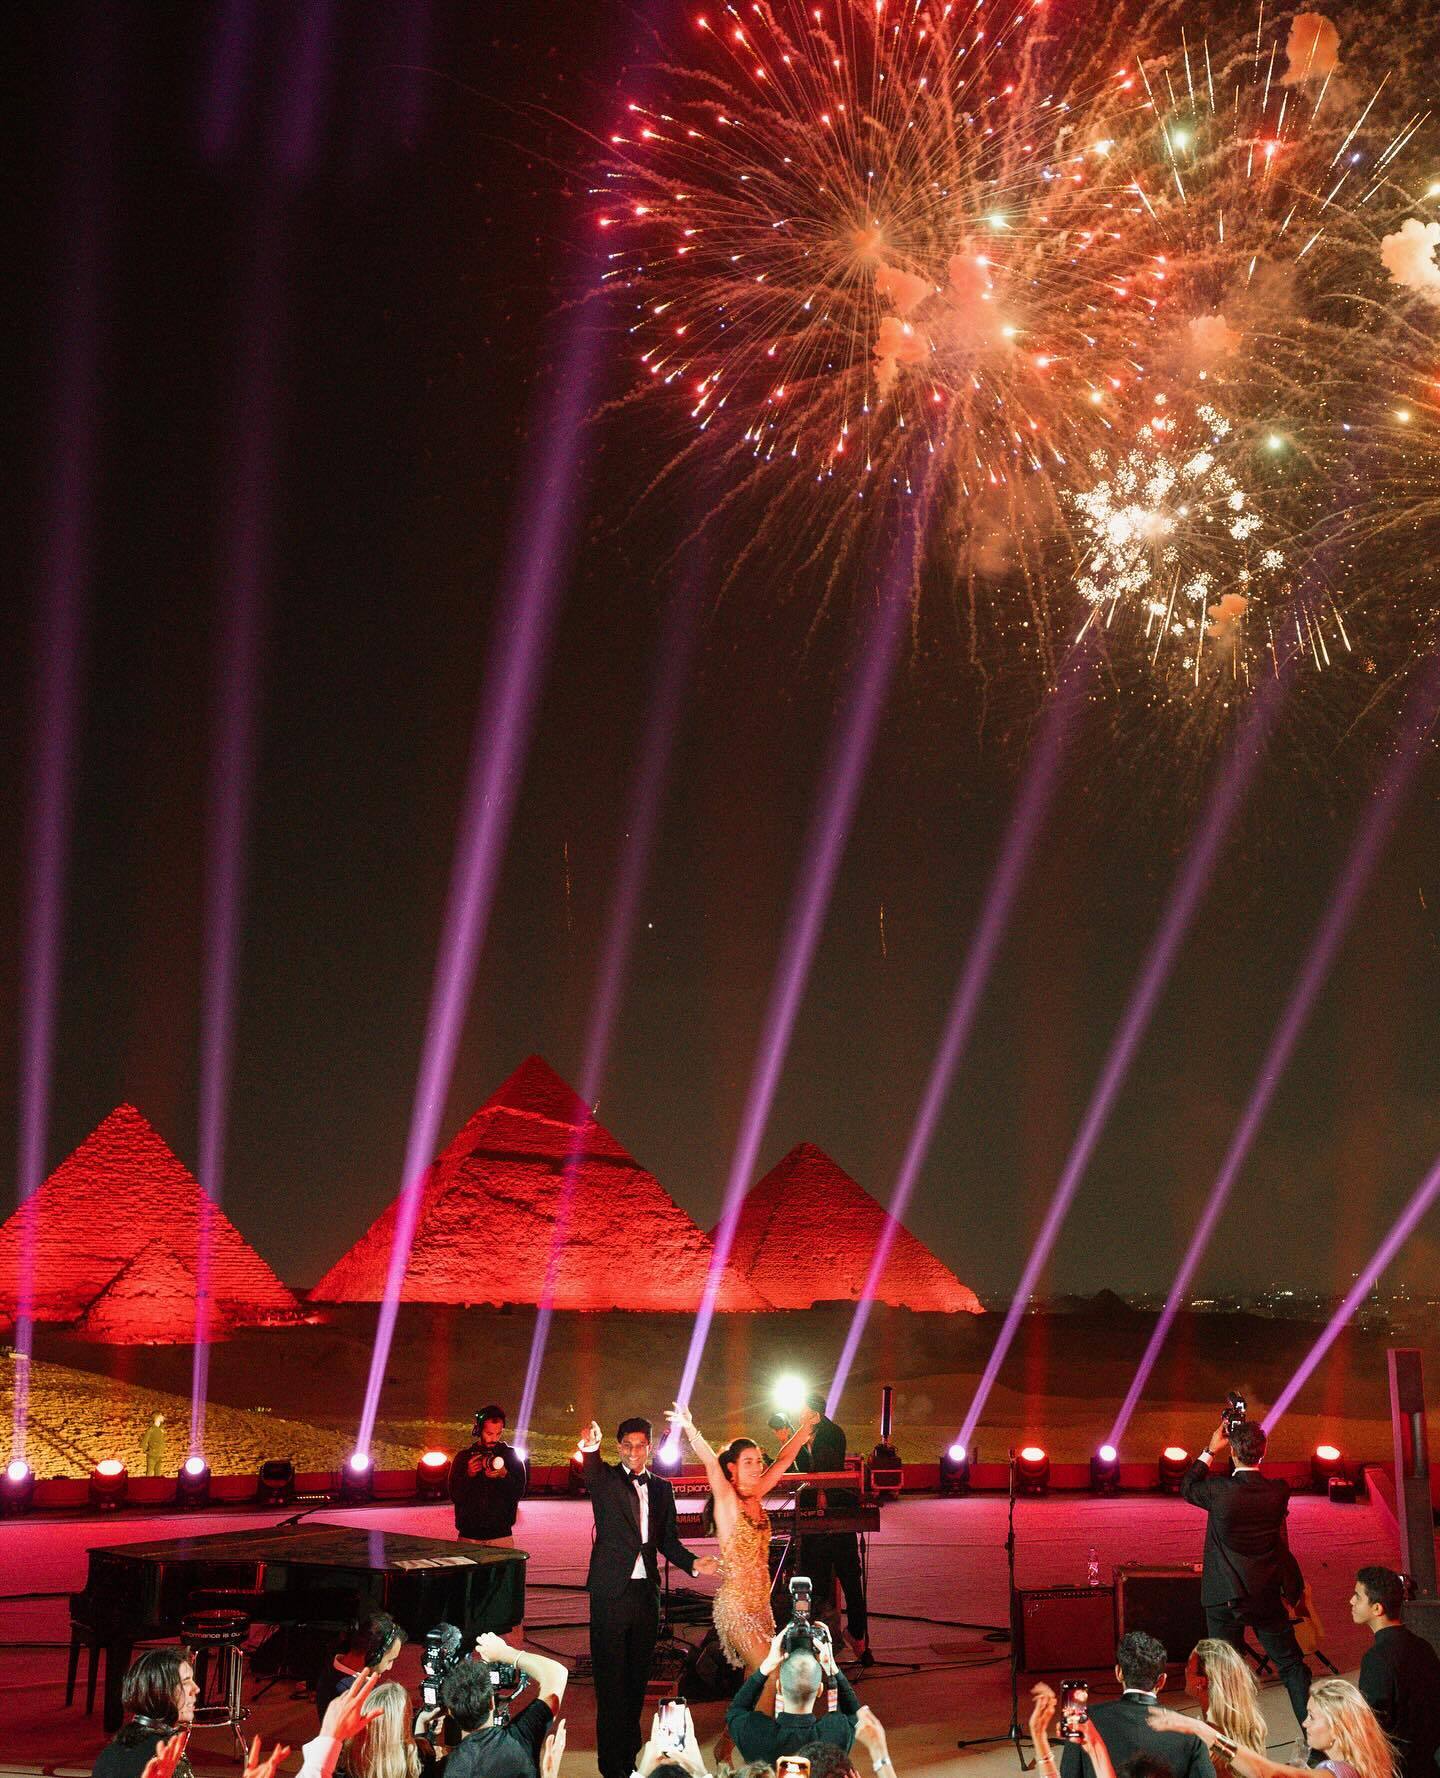 Could have been in space: American billionaire celebrates a lavish wedding at the foot of Egyptian pyramids